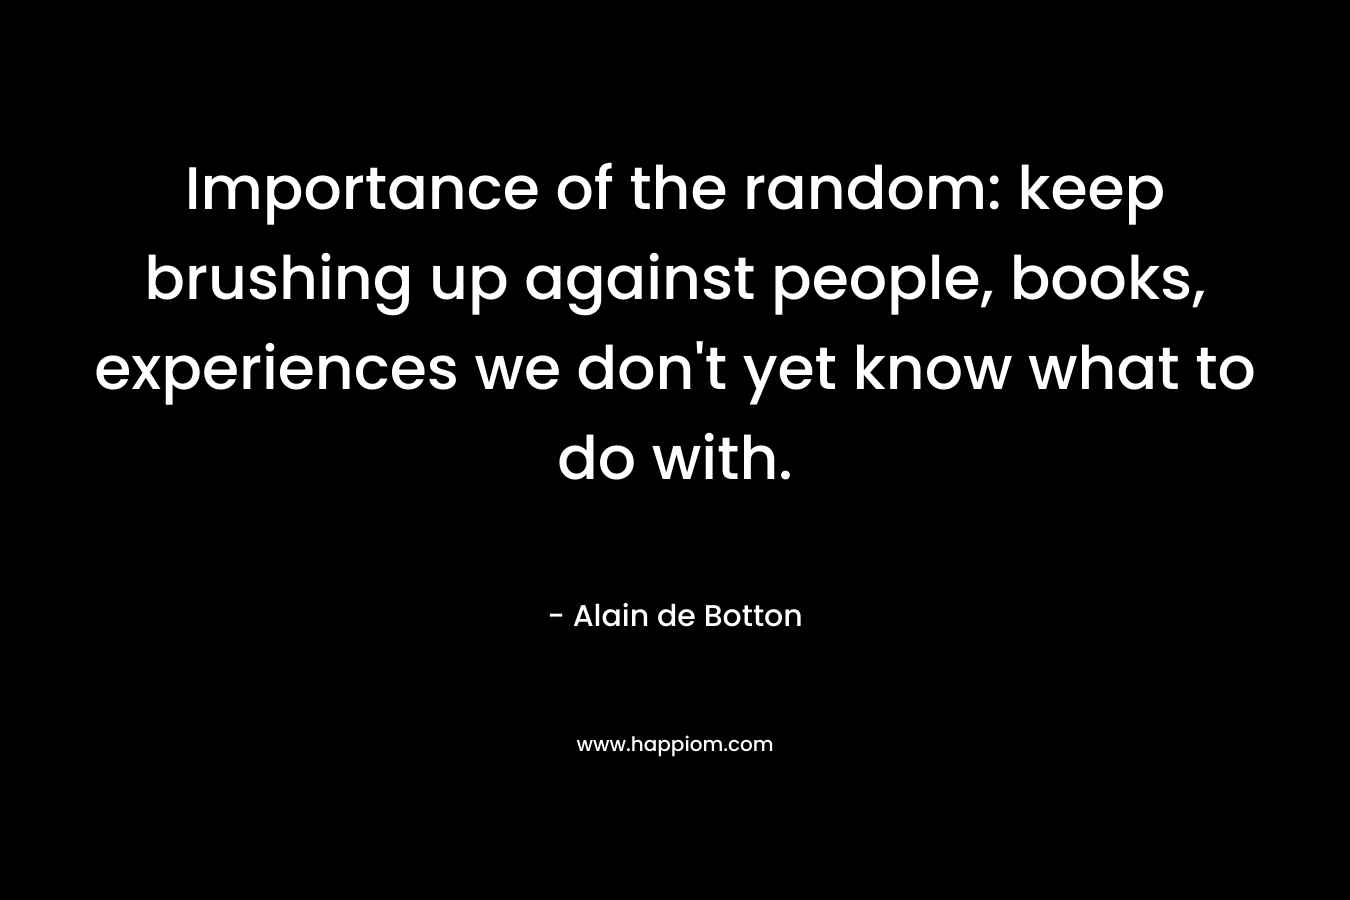 Importance of the random: keep brushing up against people, books, experiences we don't yet know what to do with.